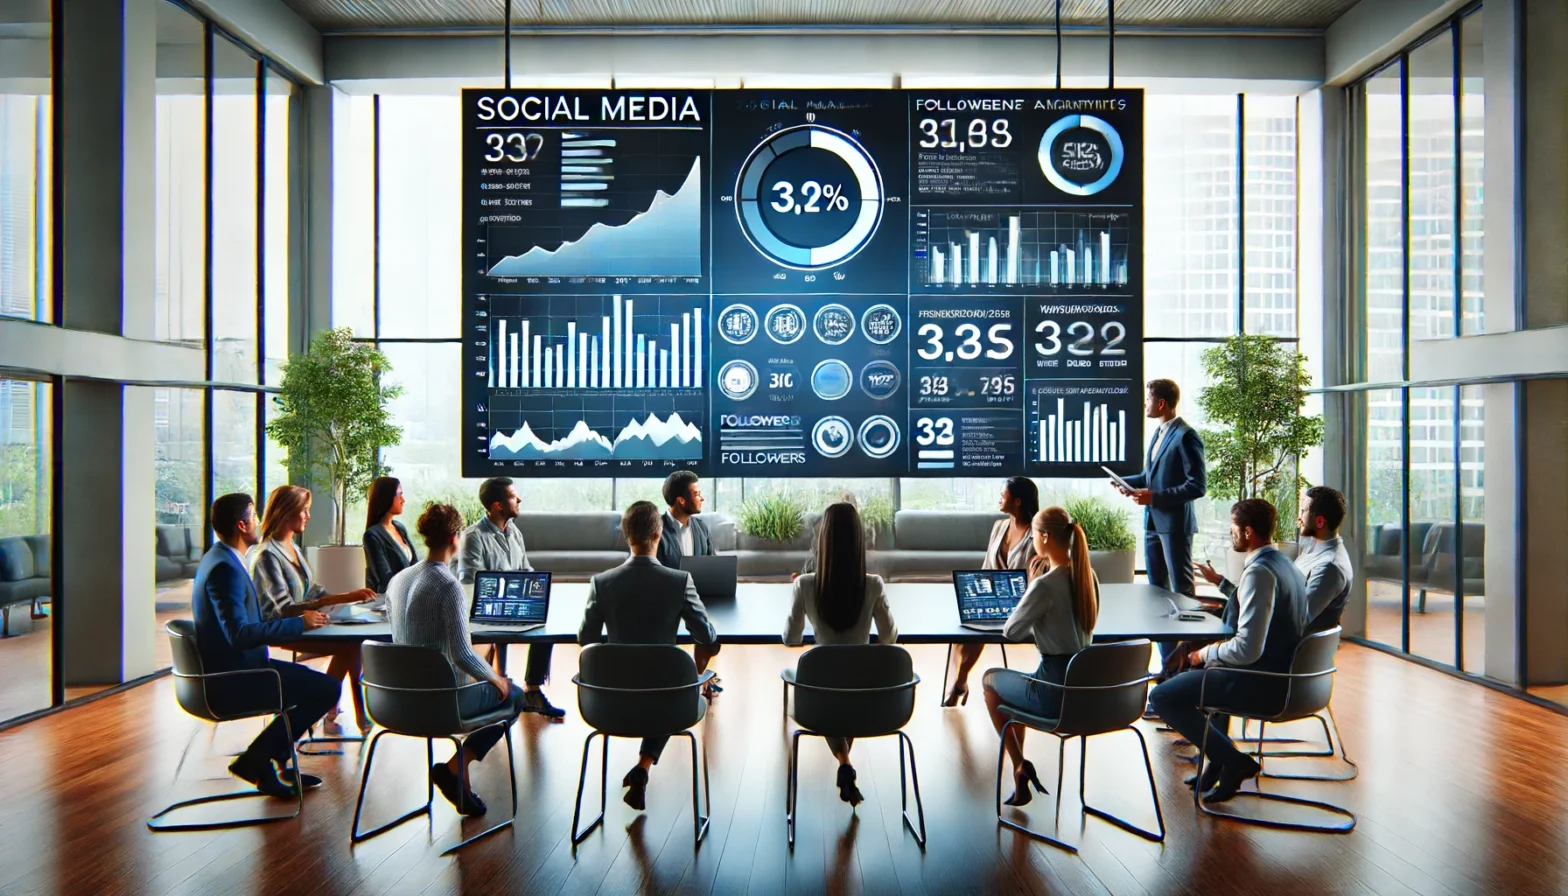 A diverse team of professionals in a modern office setting analyzes social media analytics displayed on a large digital screen. The screen shows various charts and graphs, including engagement rates, follower growth, and audience demographics. The office is sleek with large windows, plants, and modern furniture.